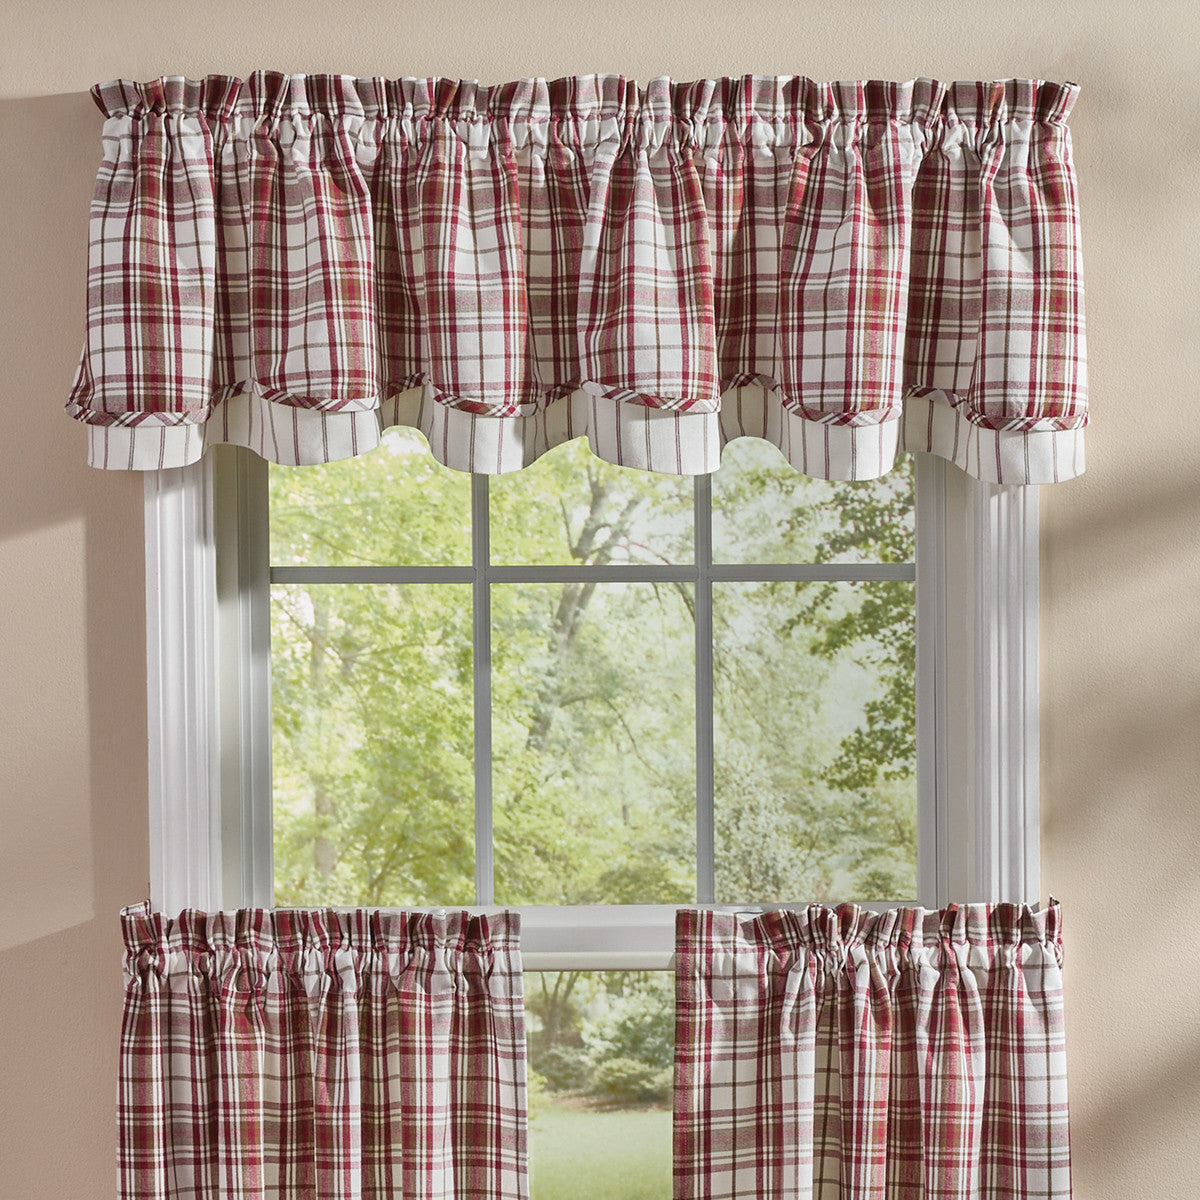 Homestyle Lined Layered Valance 16" L - Set of 2 Park designs